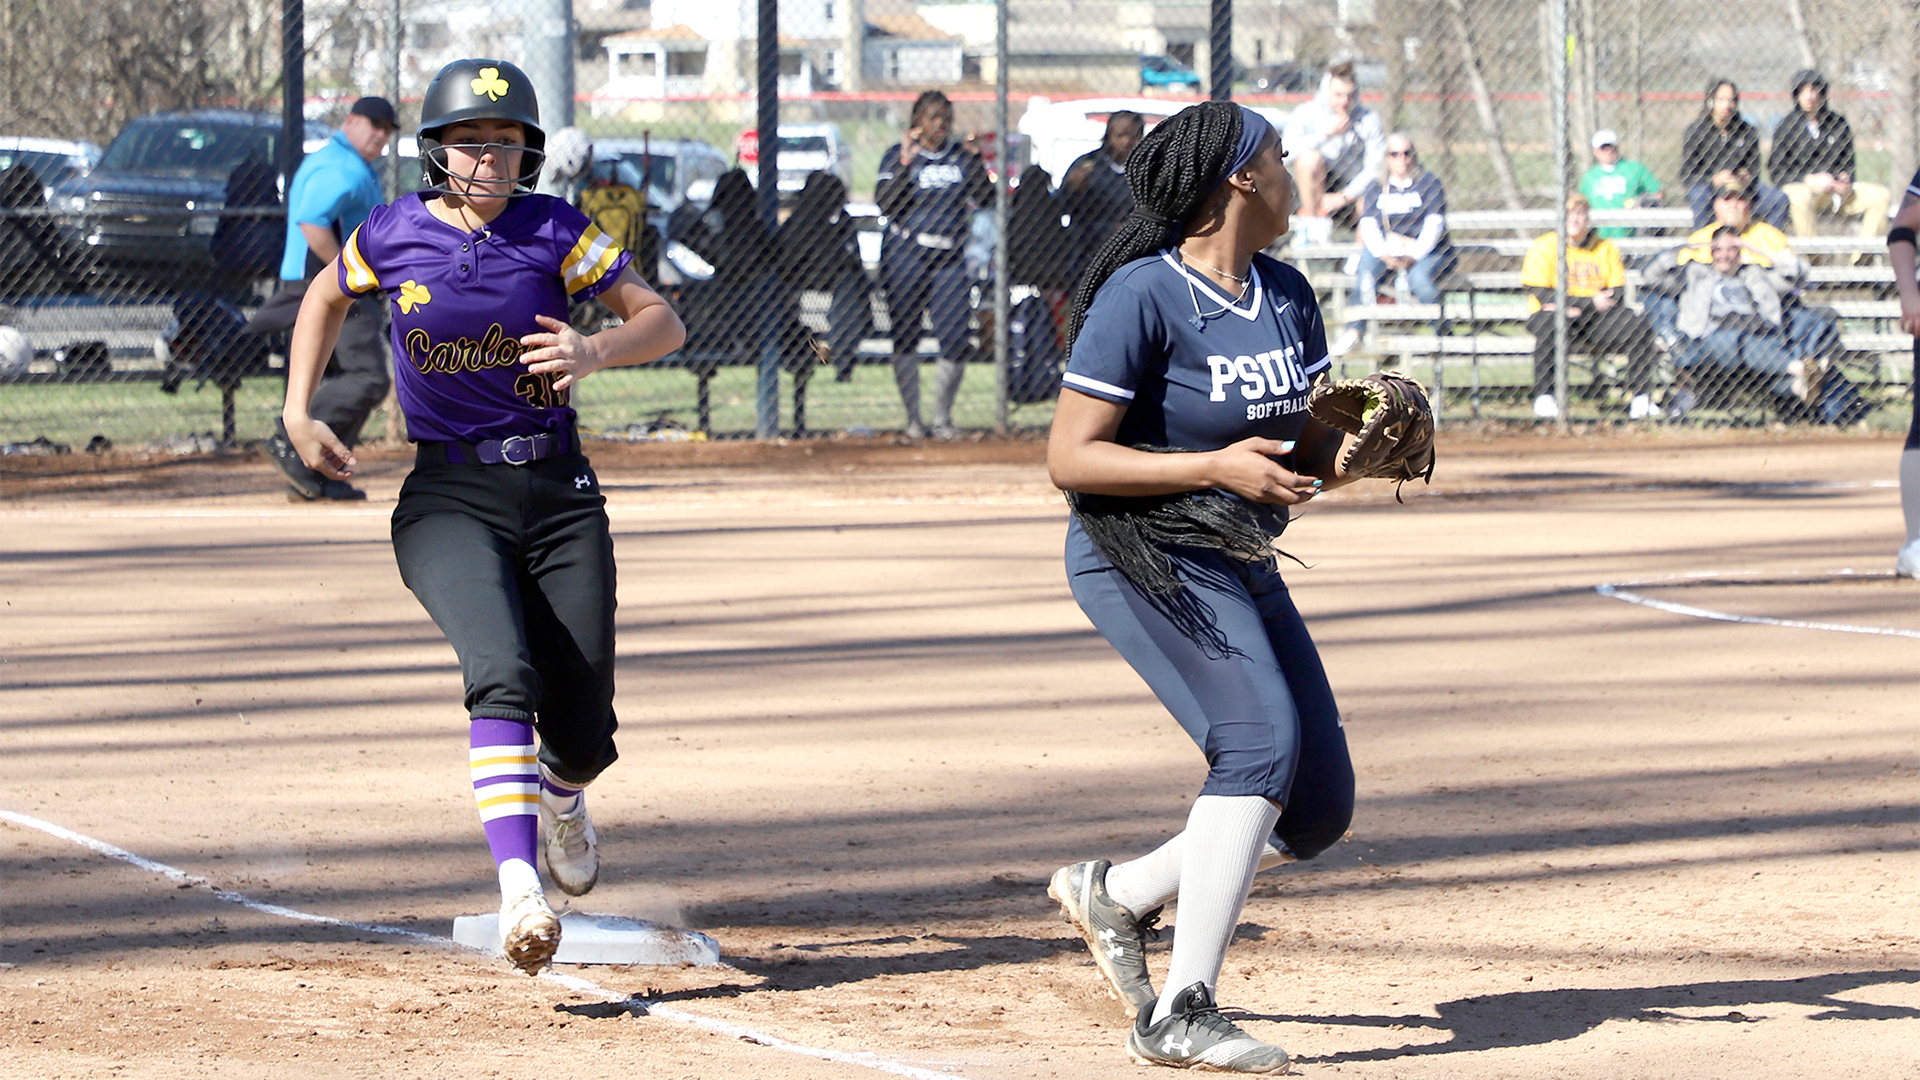 Francesca Beighley went 6 for 8 with two doubles and two RBI on the day. Photo by Robert Cifone.